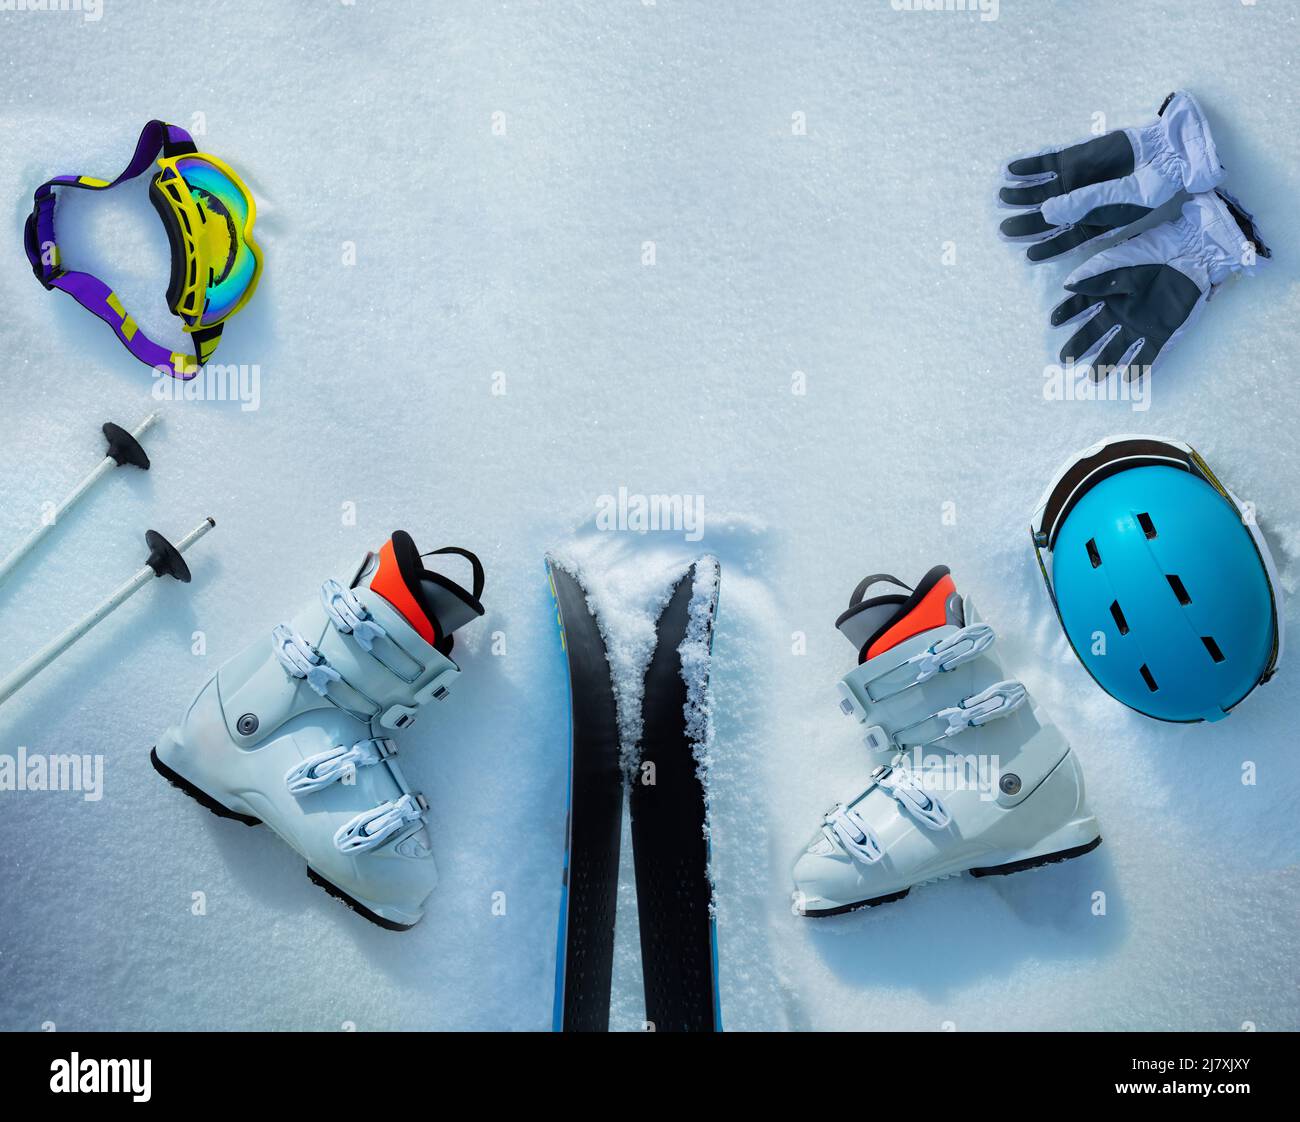 Group of objects ski boots, helmets, masks in the snow Stock Photo